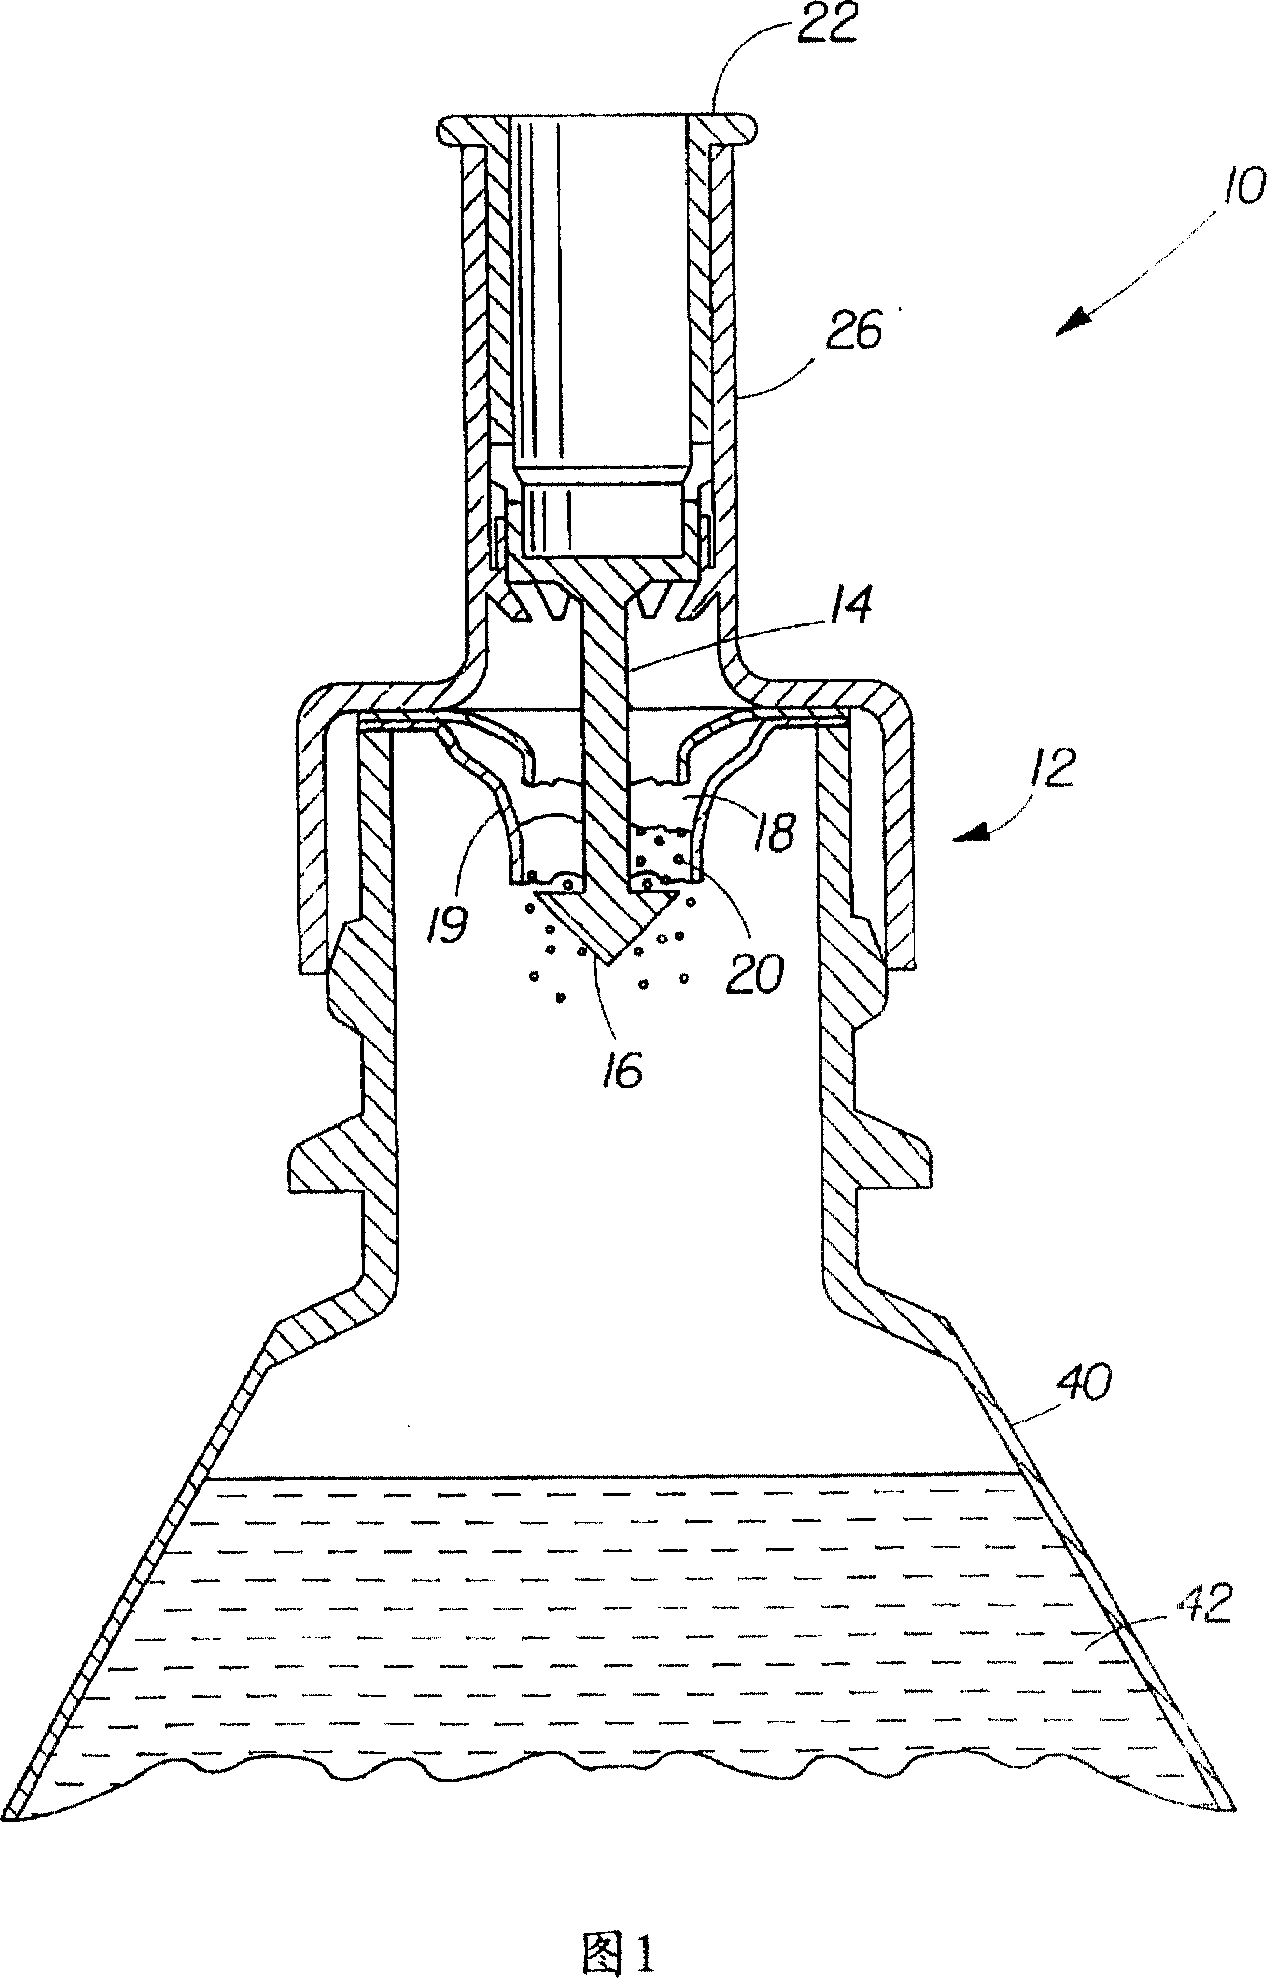 Mineral fortification systems